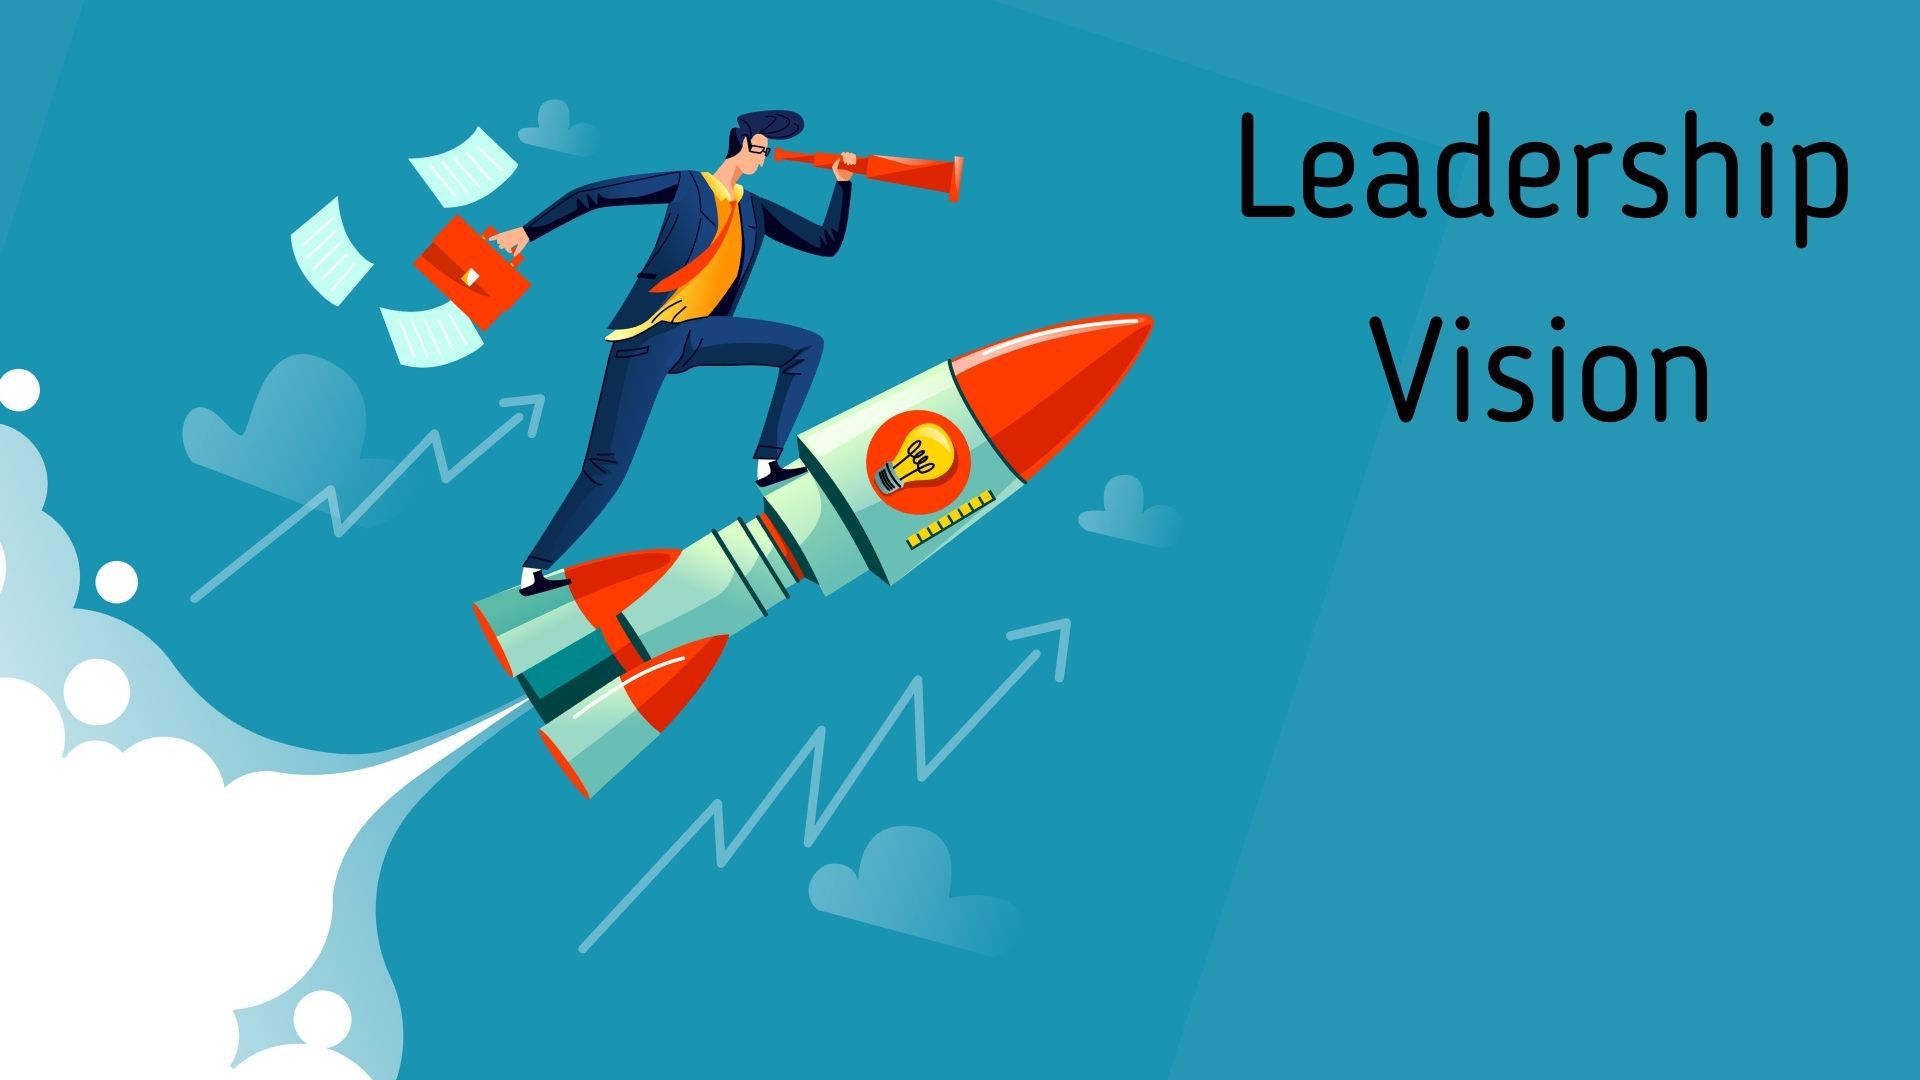 Leadership Vision Qualities And Building The Vision Marketing